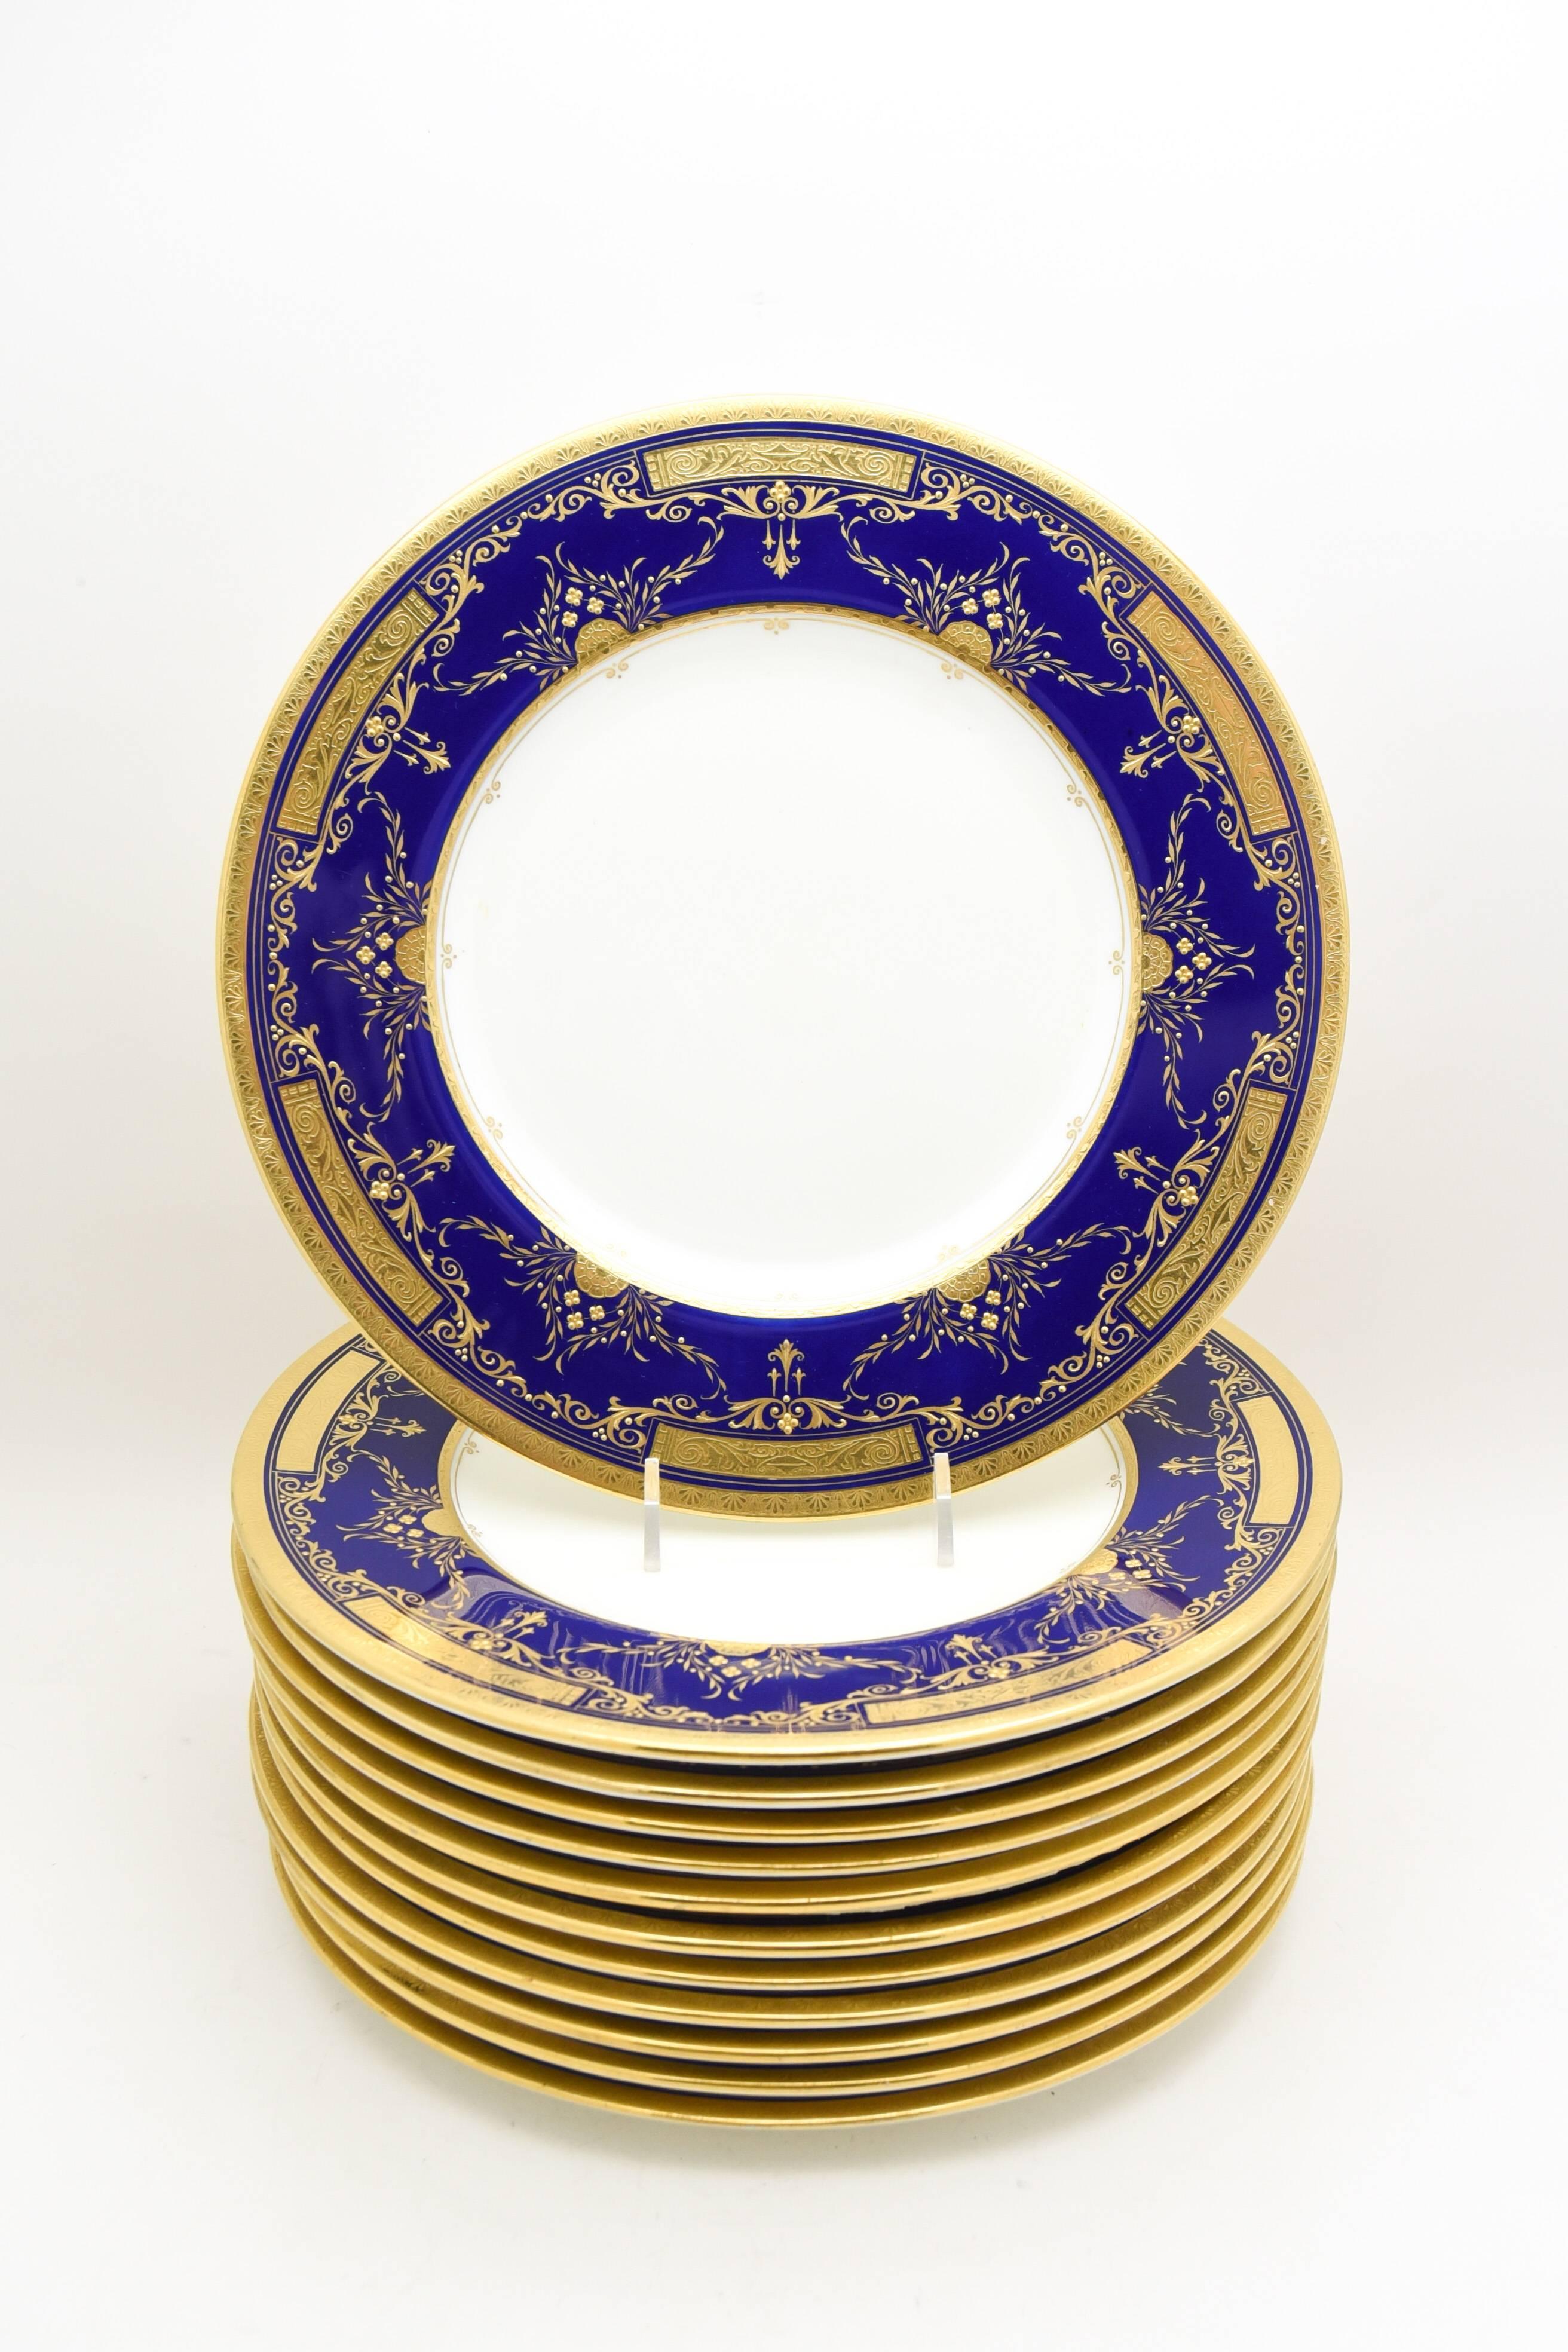 It is rare to find a true Arts and Crafts pattern on fine china of the period but this set of 12 Minton dinner plates accurately exemplify the style. Elegant but understated, the acid etched gold with applied 